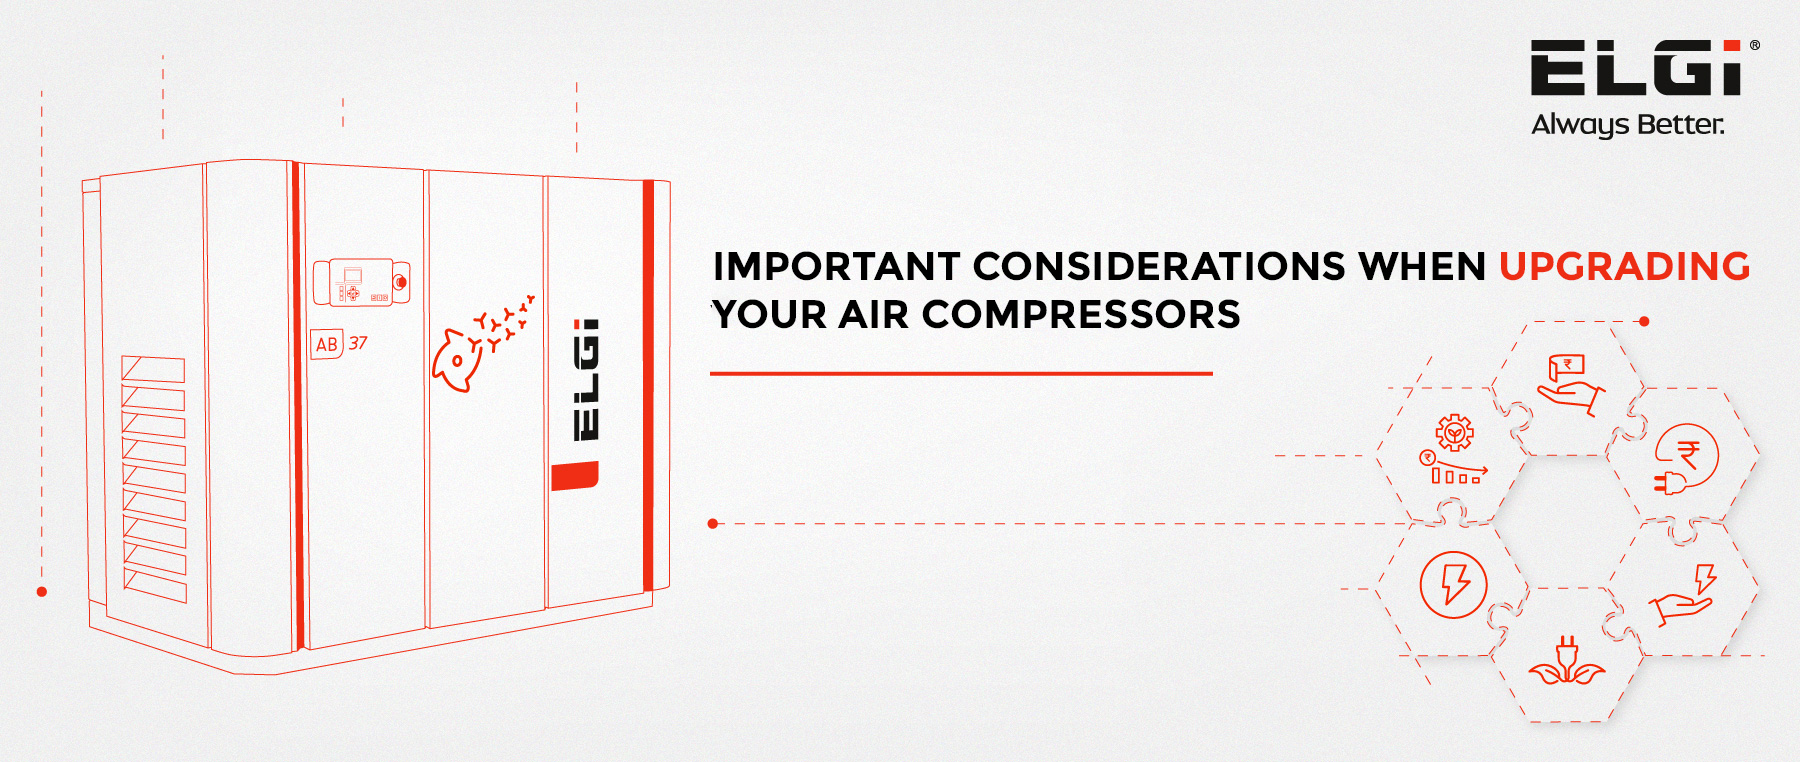 Important Considerations When Upgrading Your Air Compressors